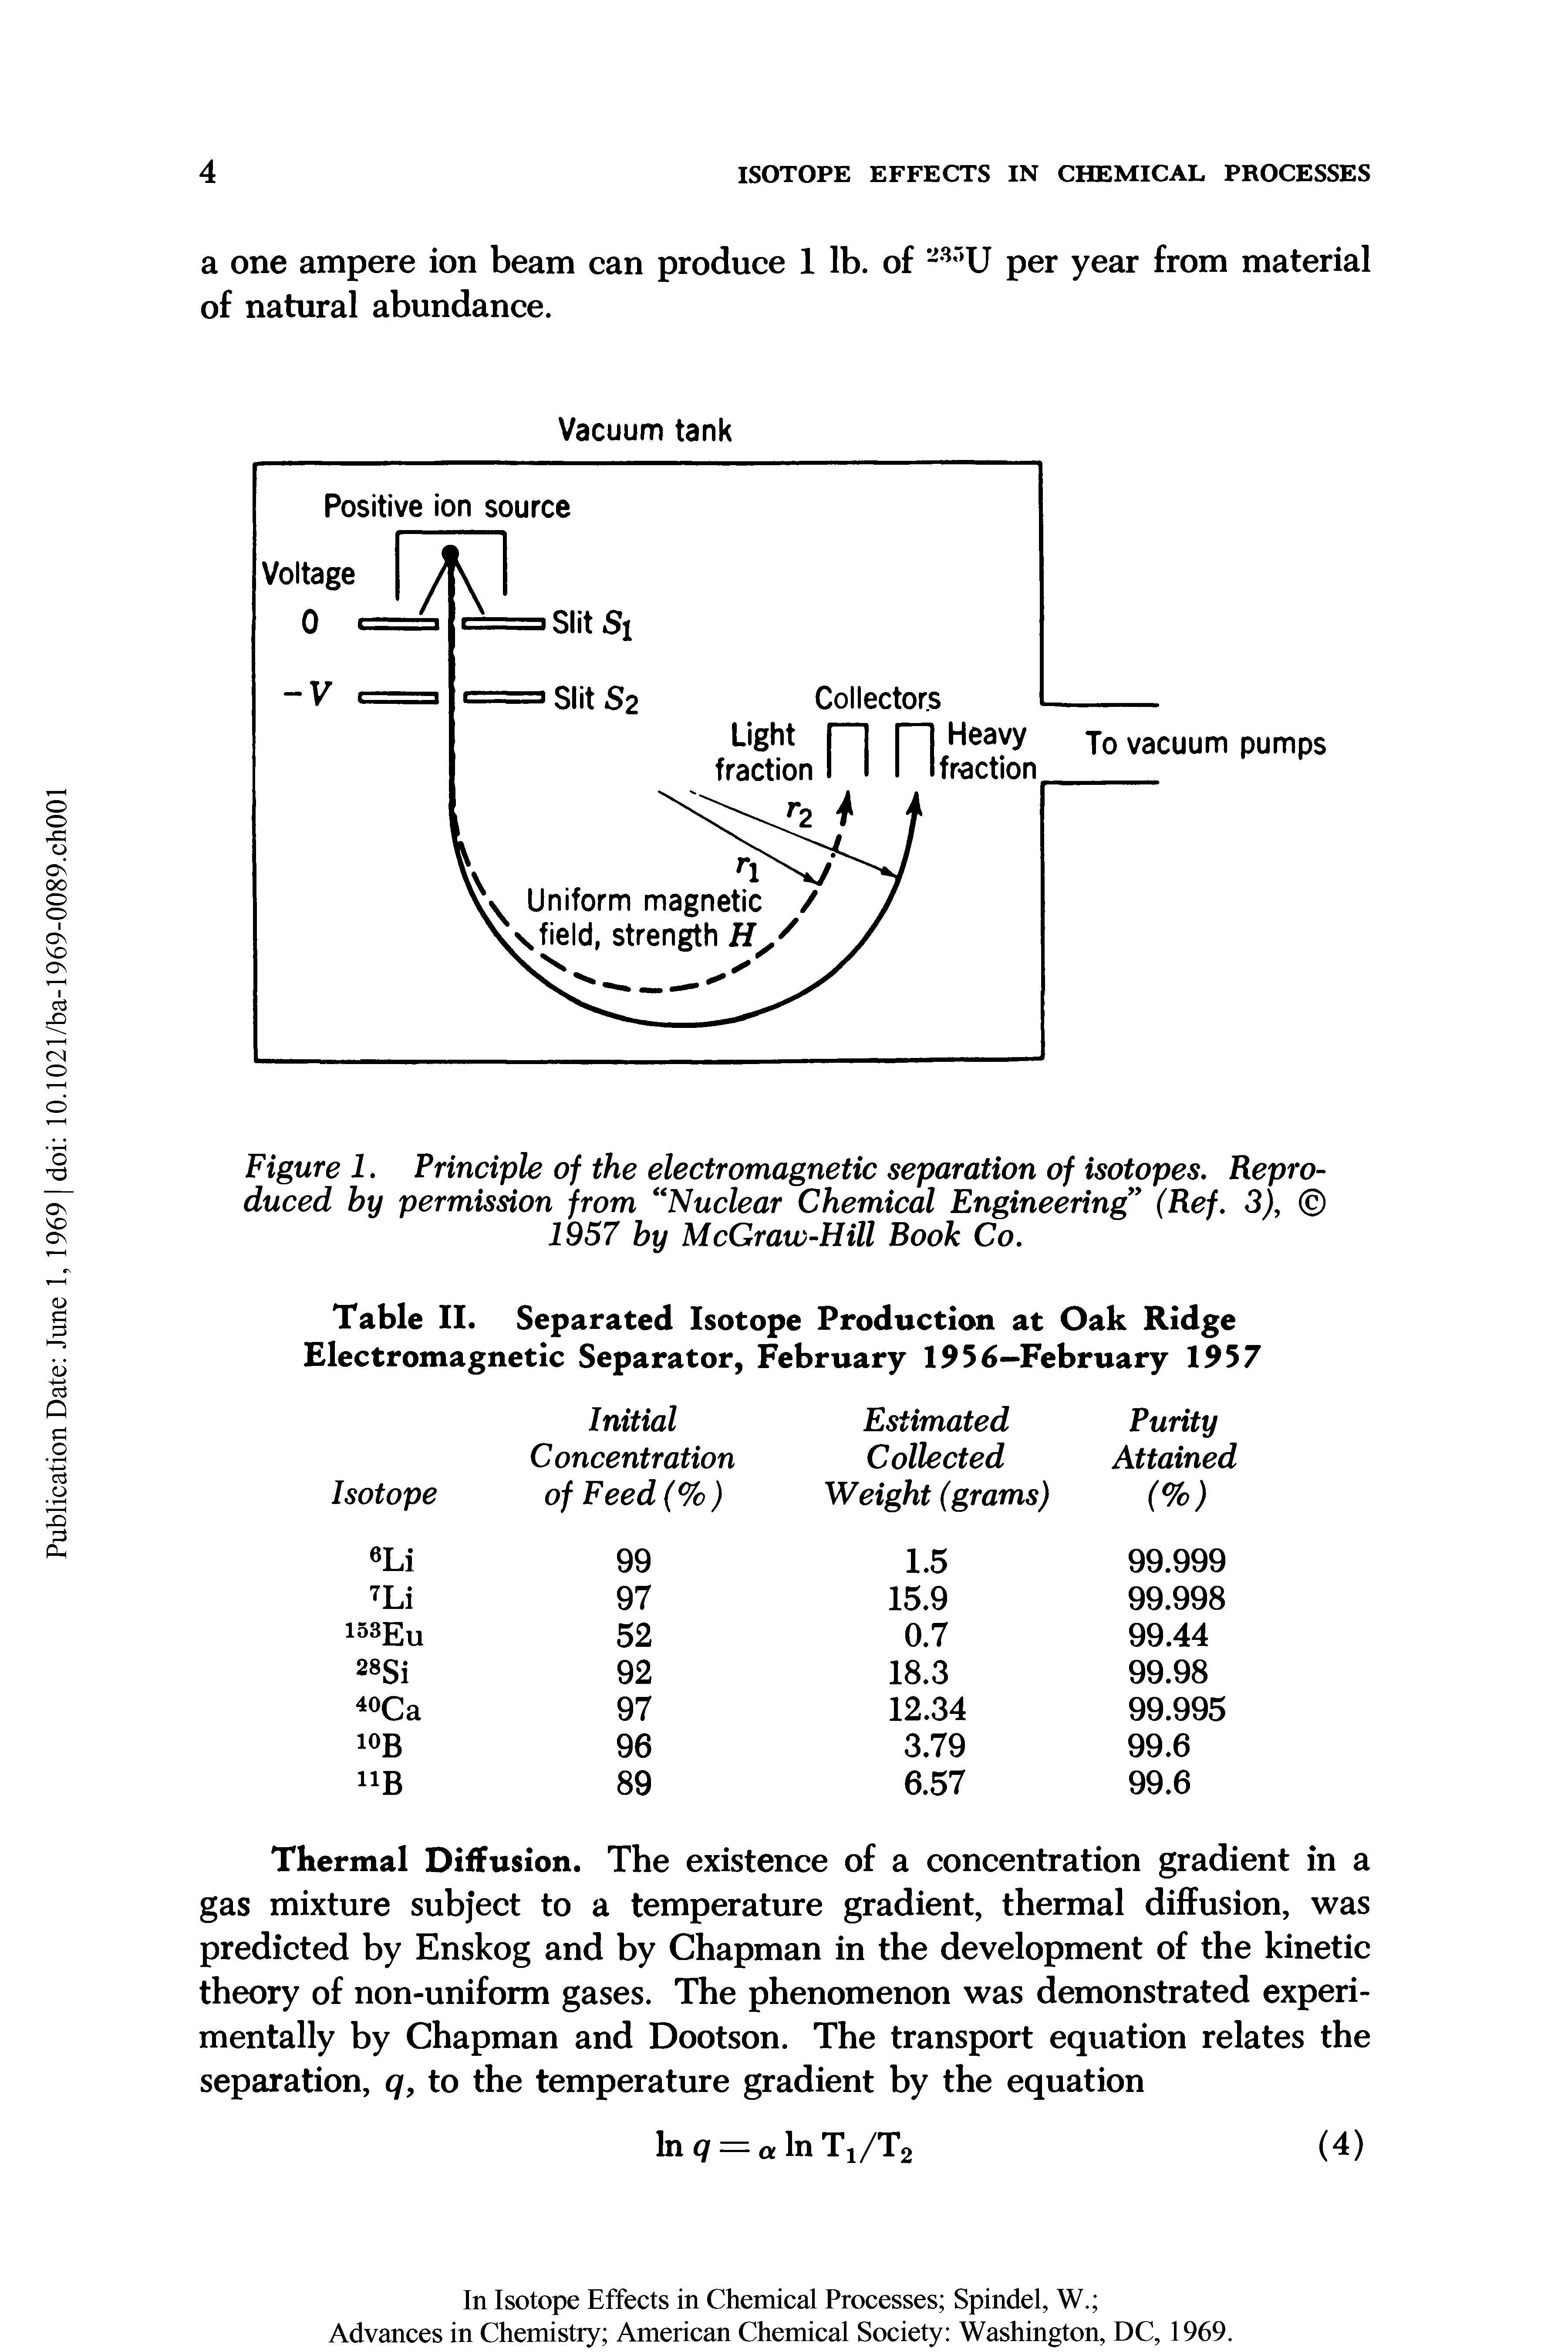 Table II. Separated Isotope Production at Oak Ridge Electromagnetic Separator, February 1956-February 1957...